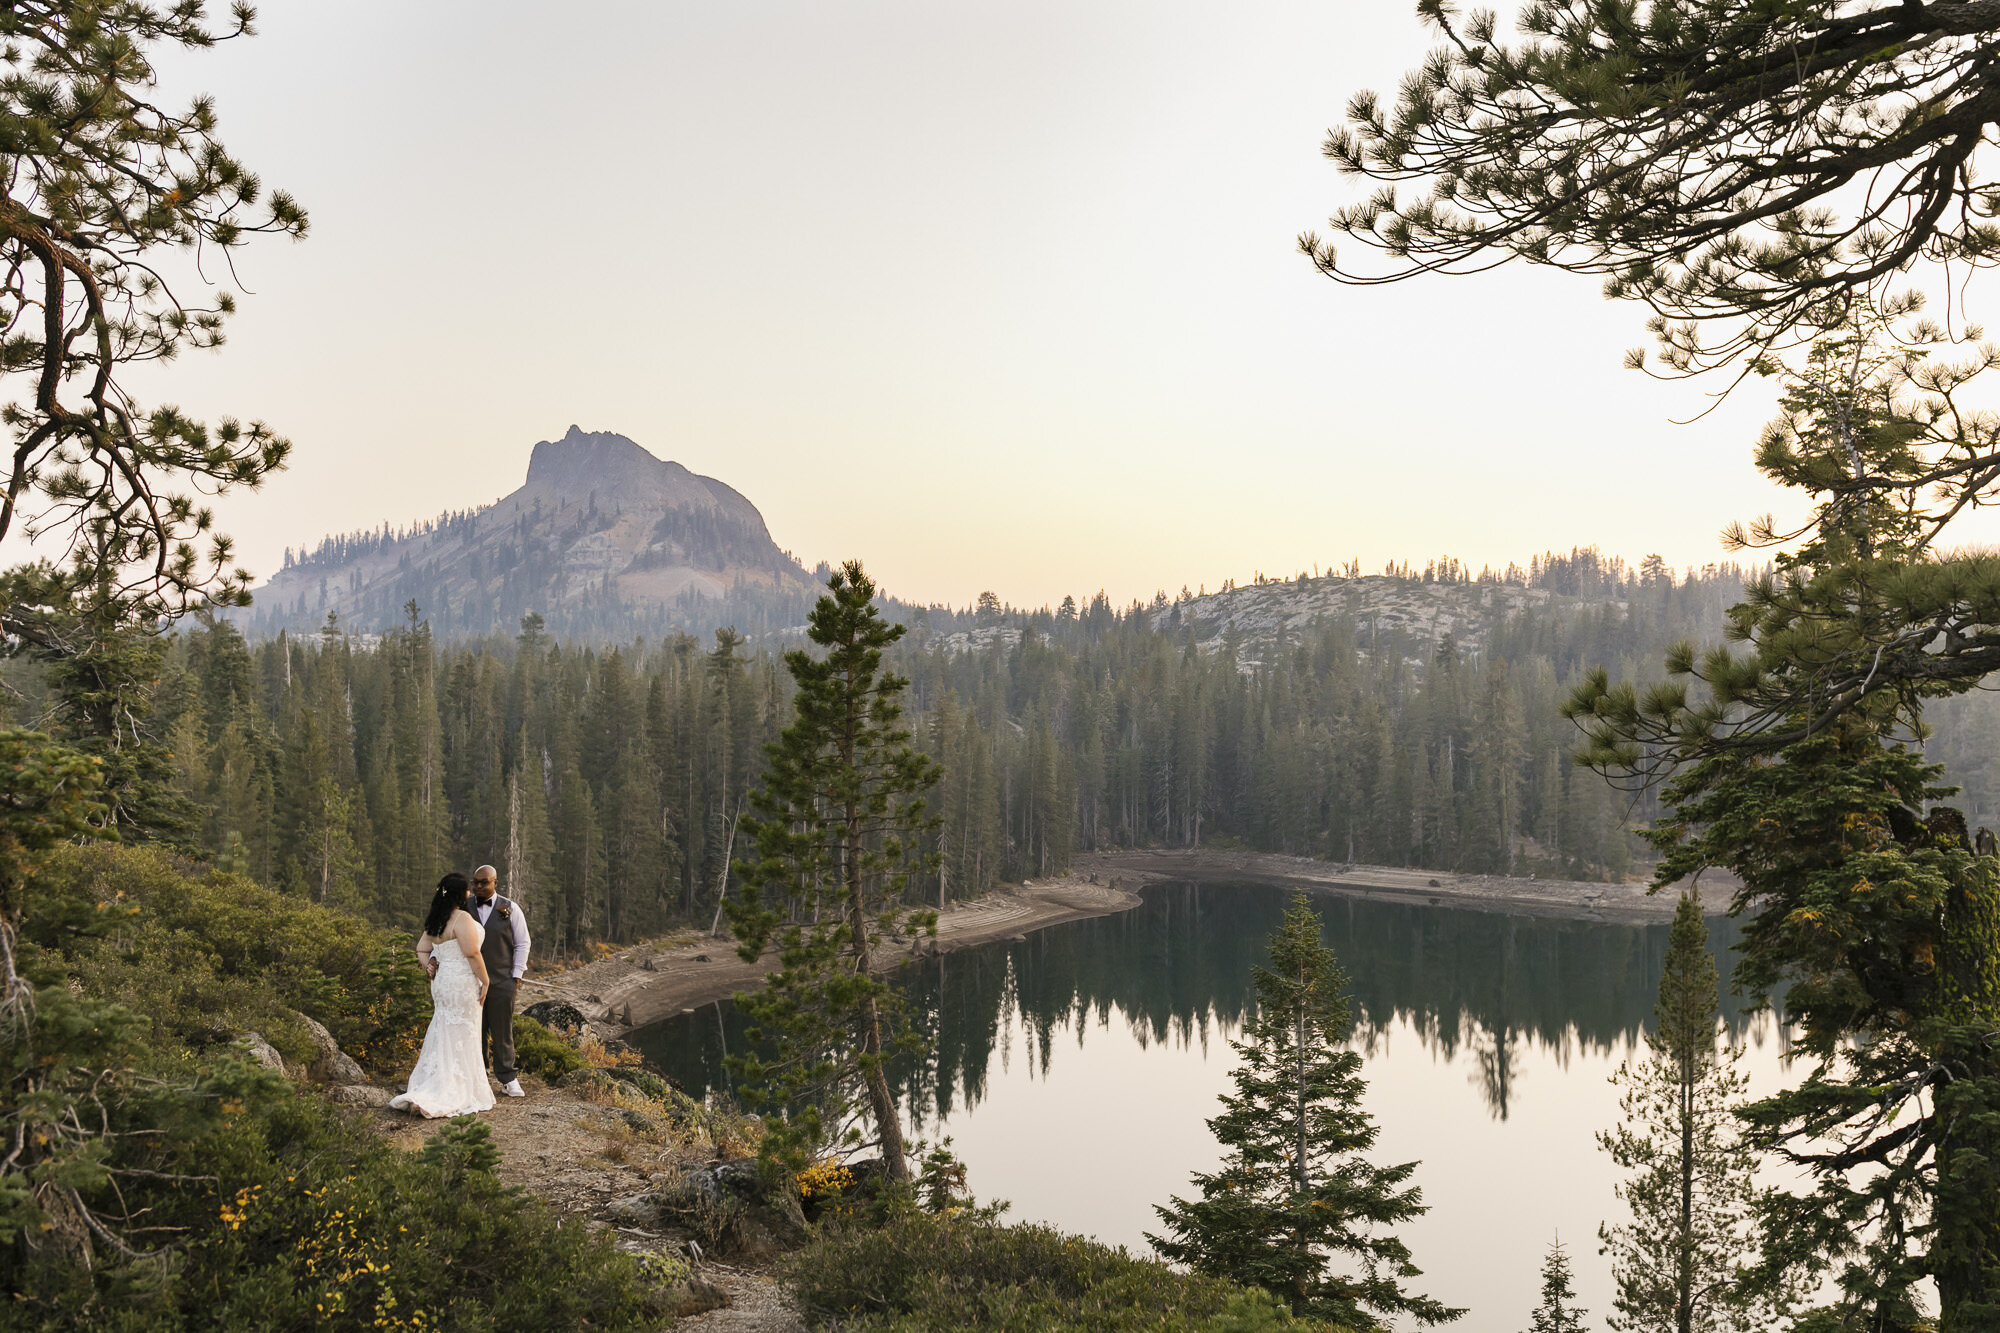 Wedding couple overlook lake and mountain in Tahoe forest during their adventurous elopement